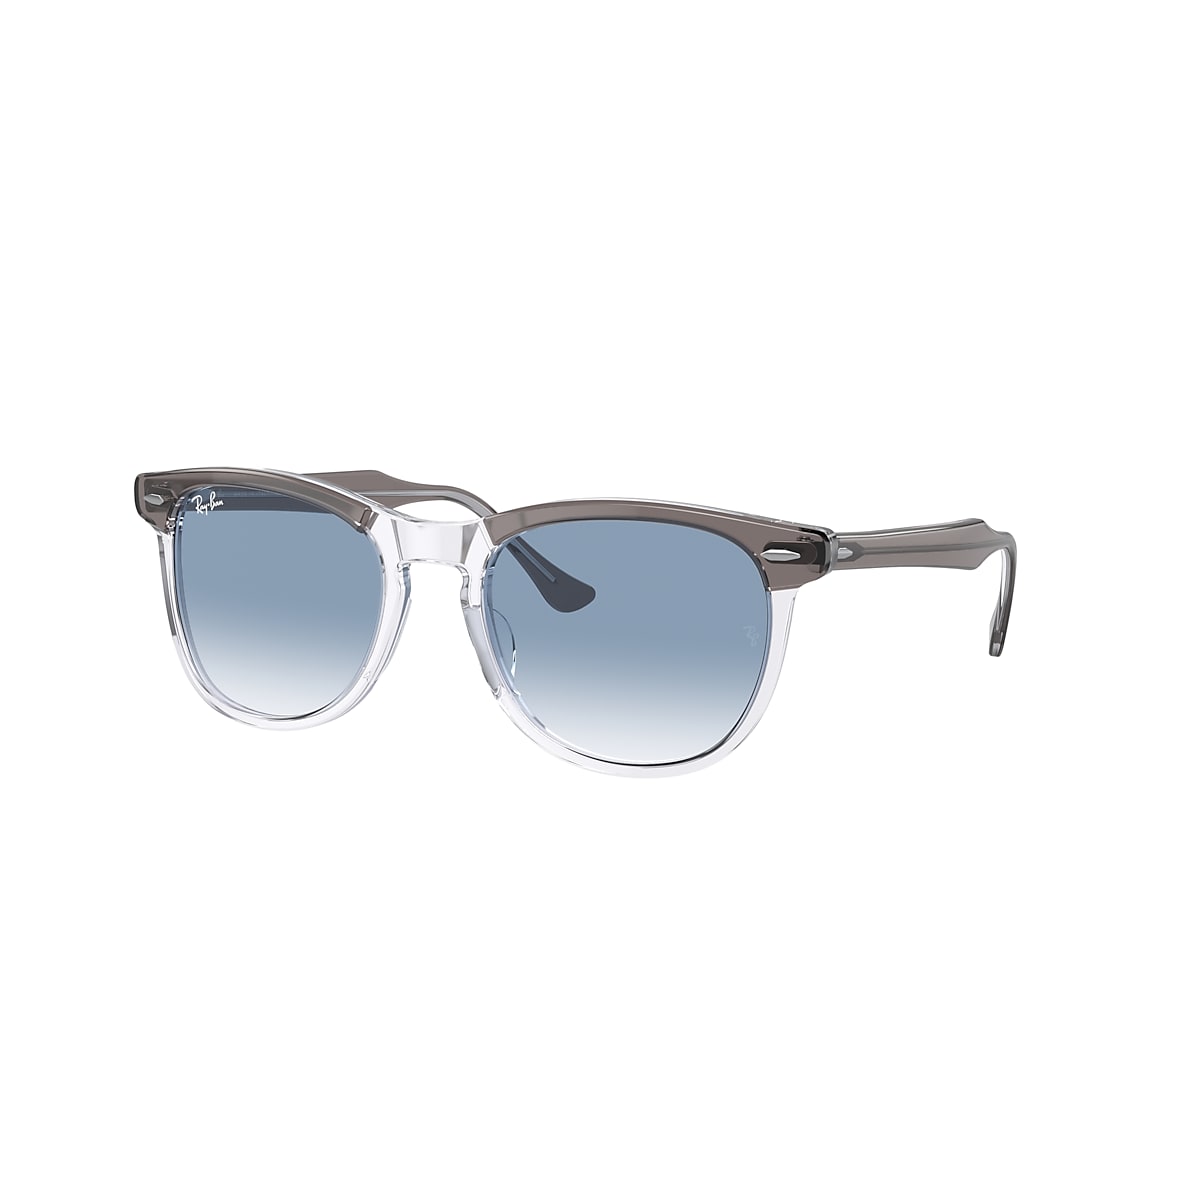 EAGLE EYE Sunglasses in Grey On Transparent and Blue - RB2398 